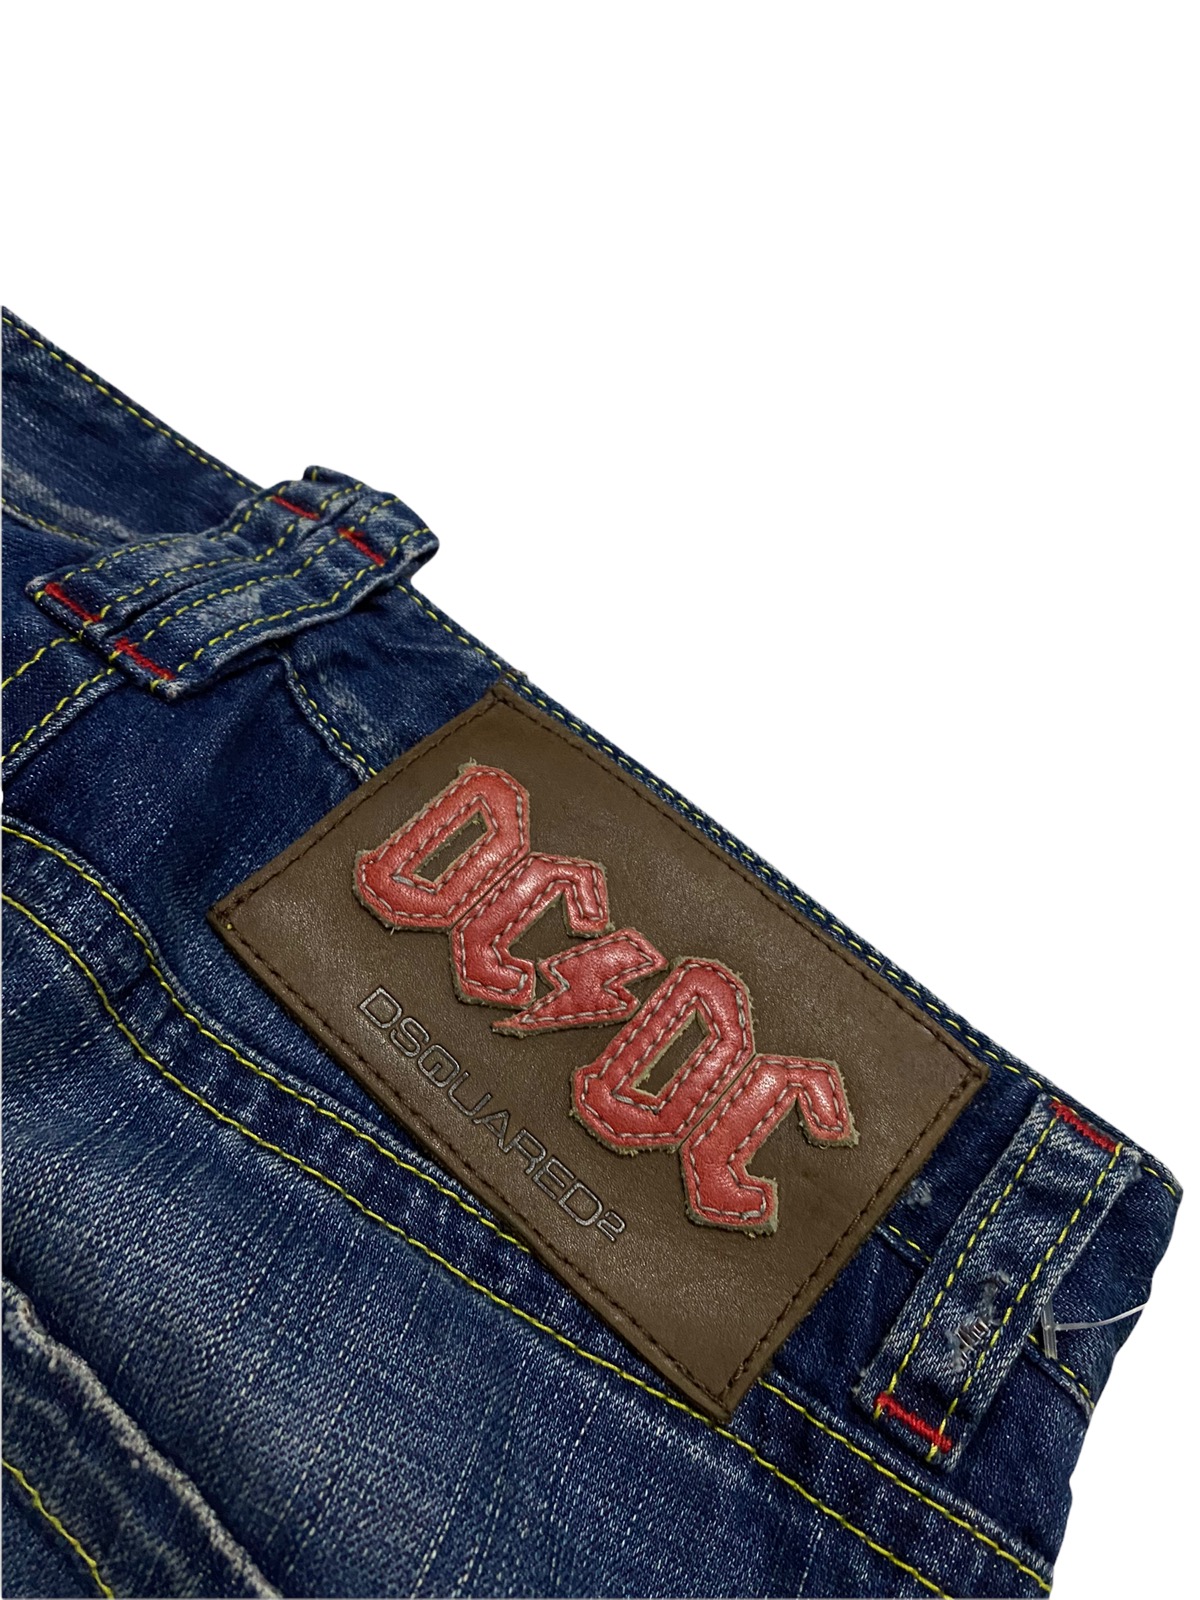 Dsquared2 ACDC Parody Fucker Made in Italy Jeans - 11